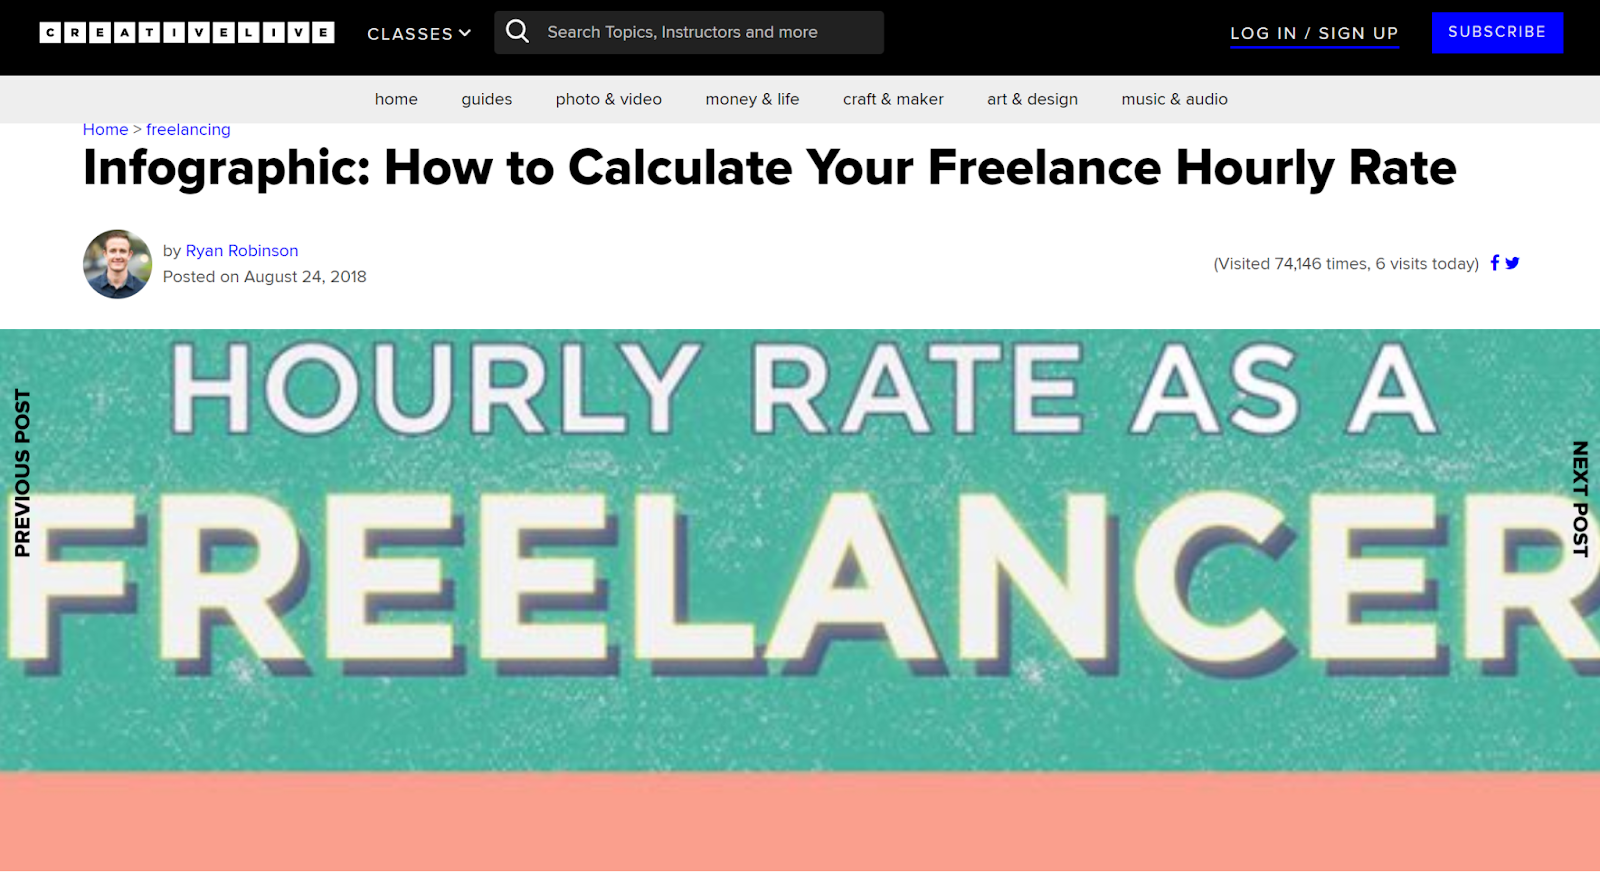 Ryan Robinson used the skyscraper technique in his article targeting the keyword "freelance hourly rate calculator"